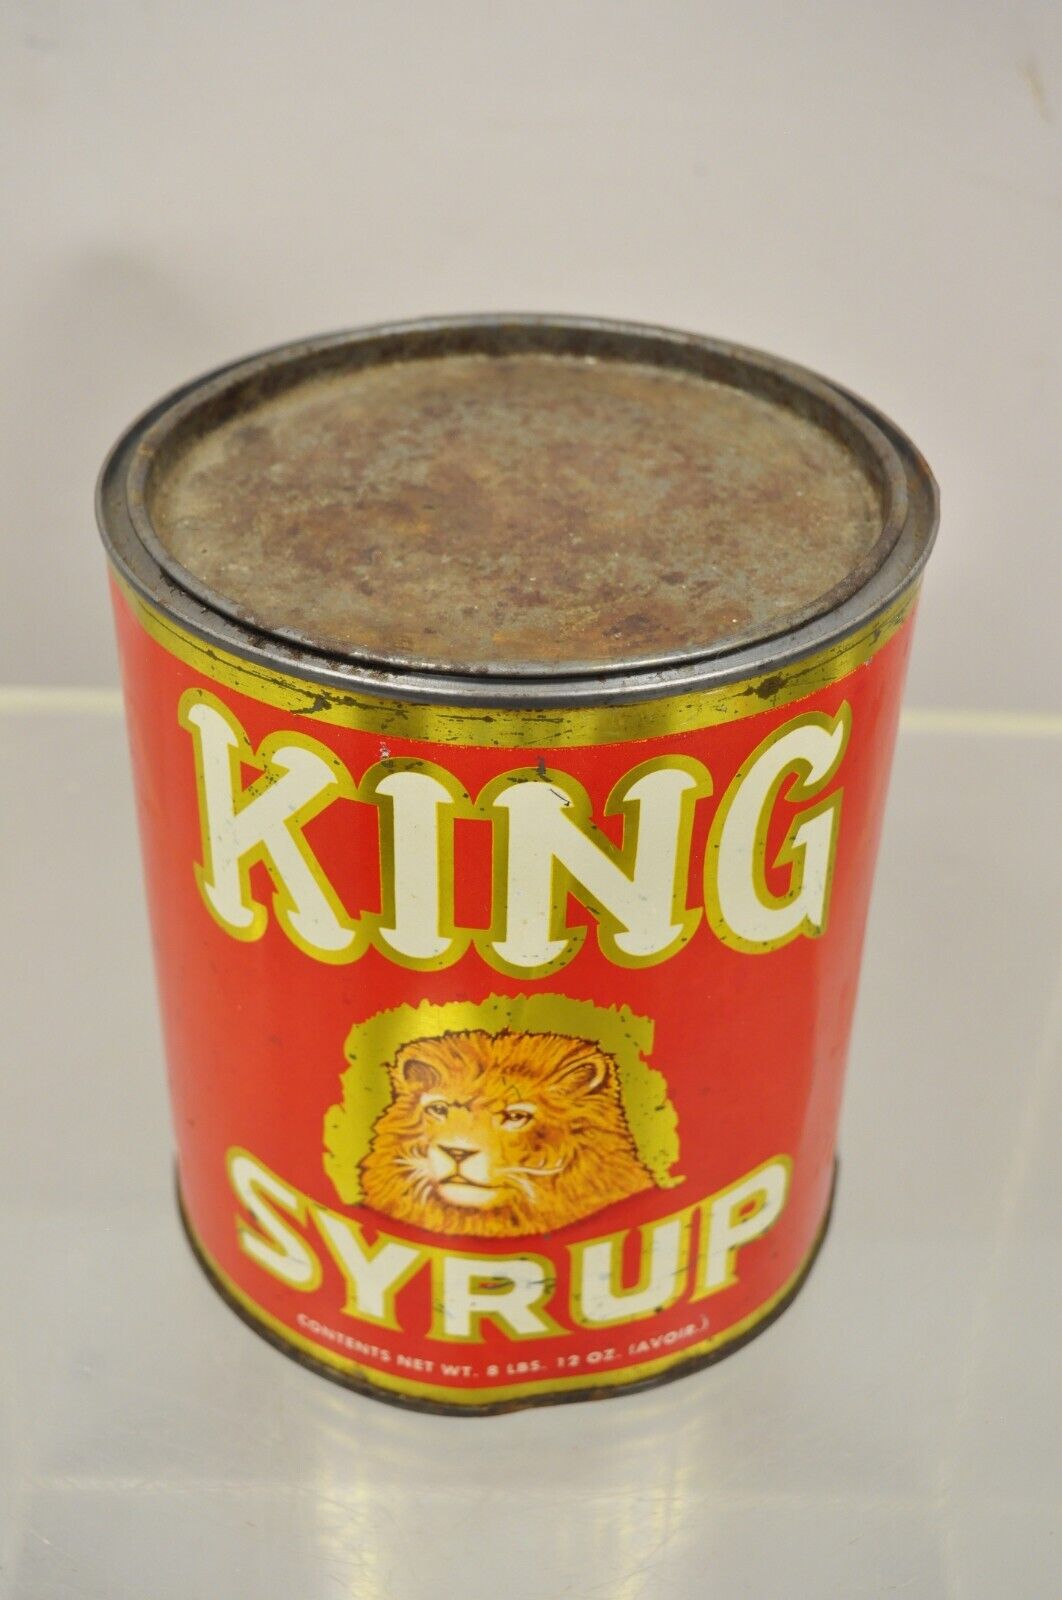 Vintage King Syrup Lion Head Tin Can Advertisement 8 lbs Mangels Herold (H)